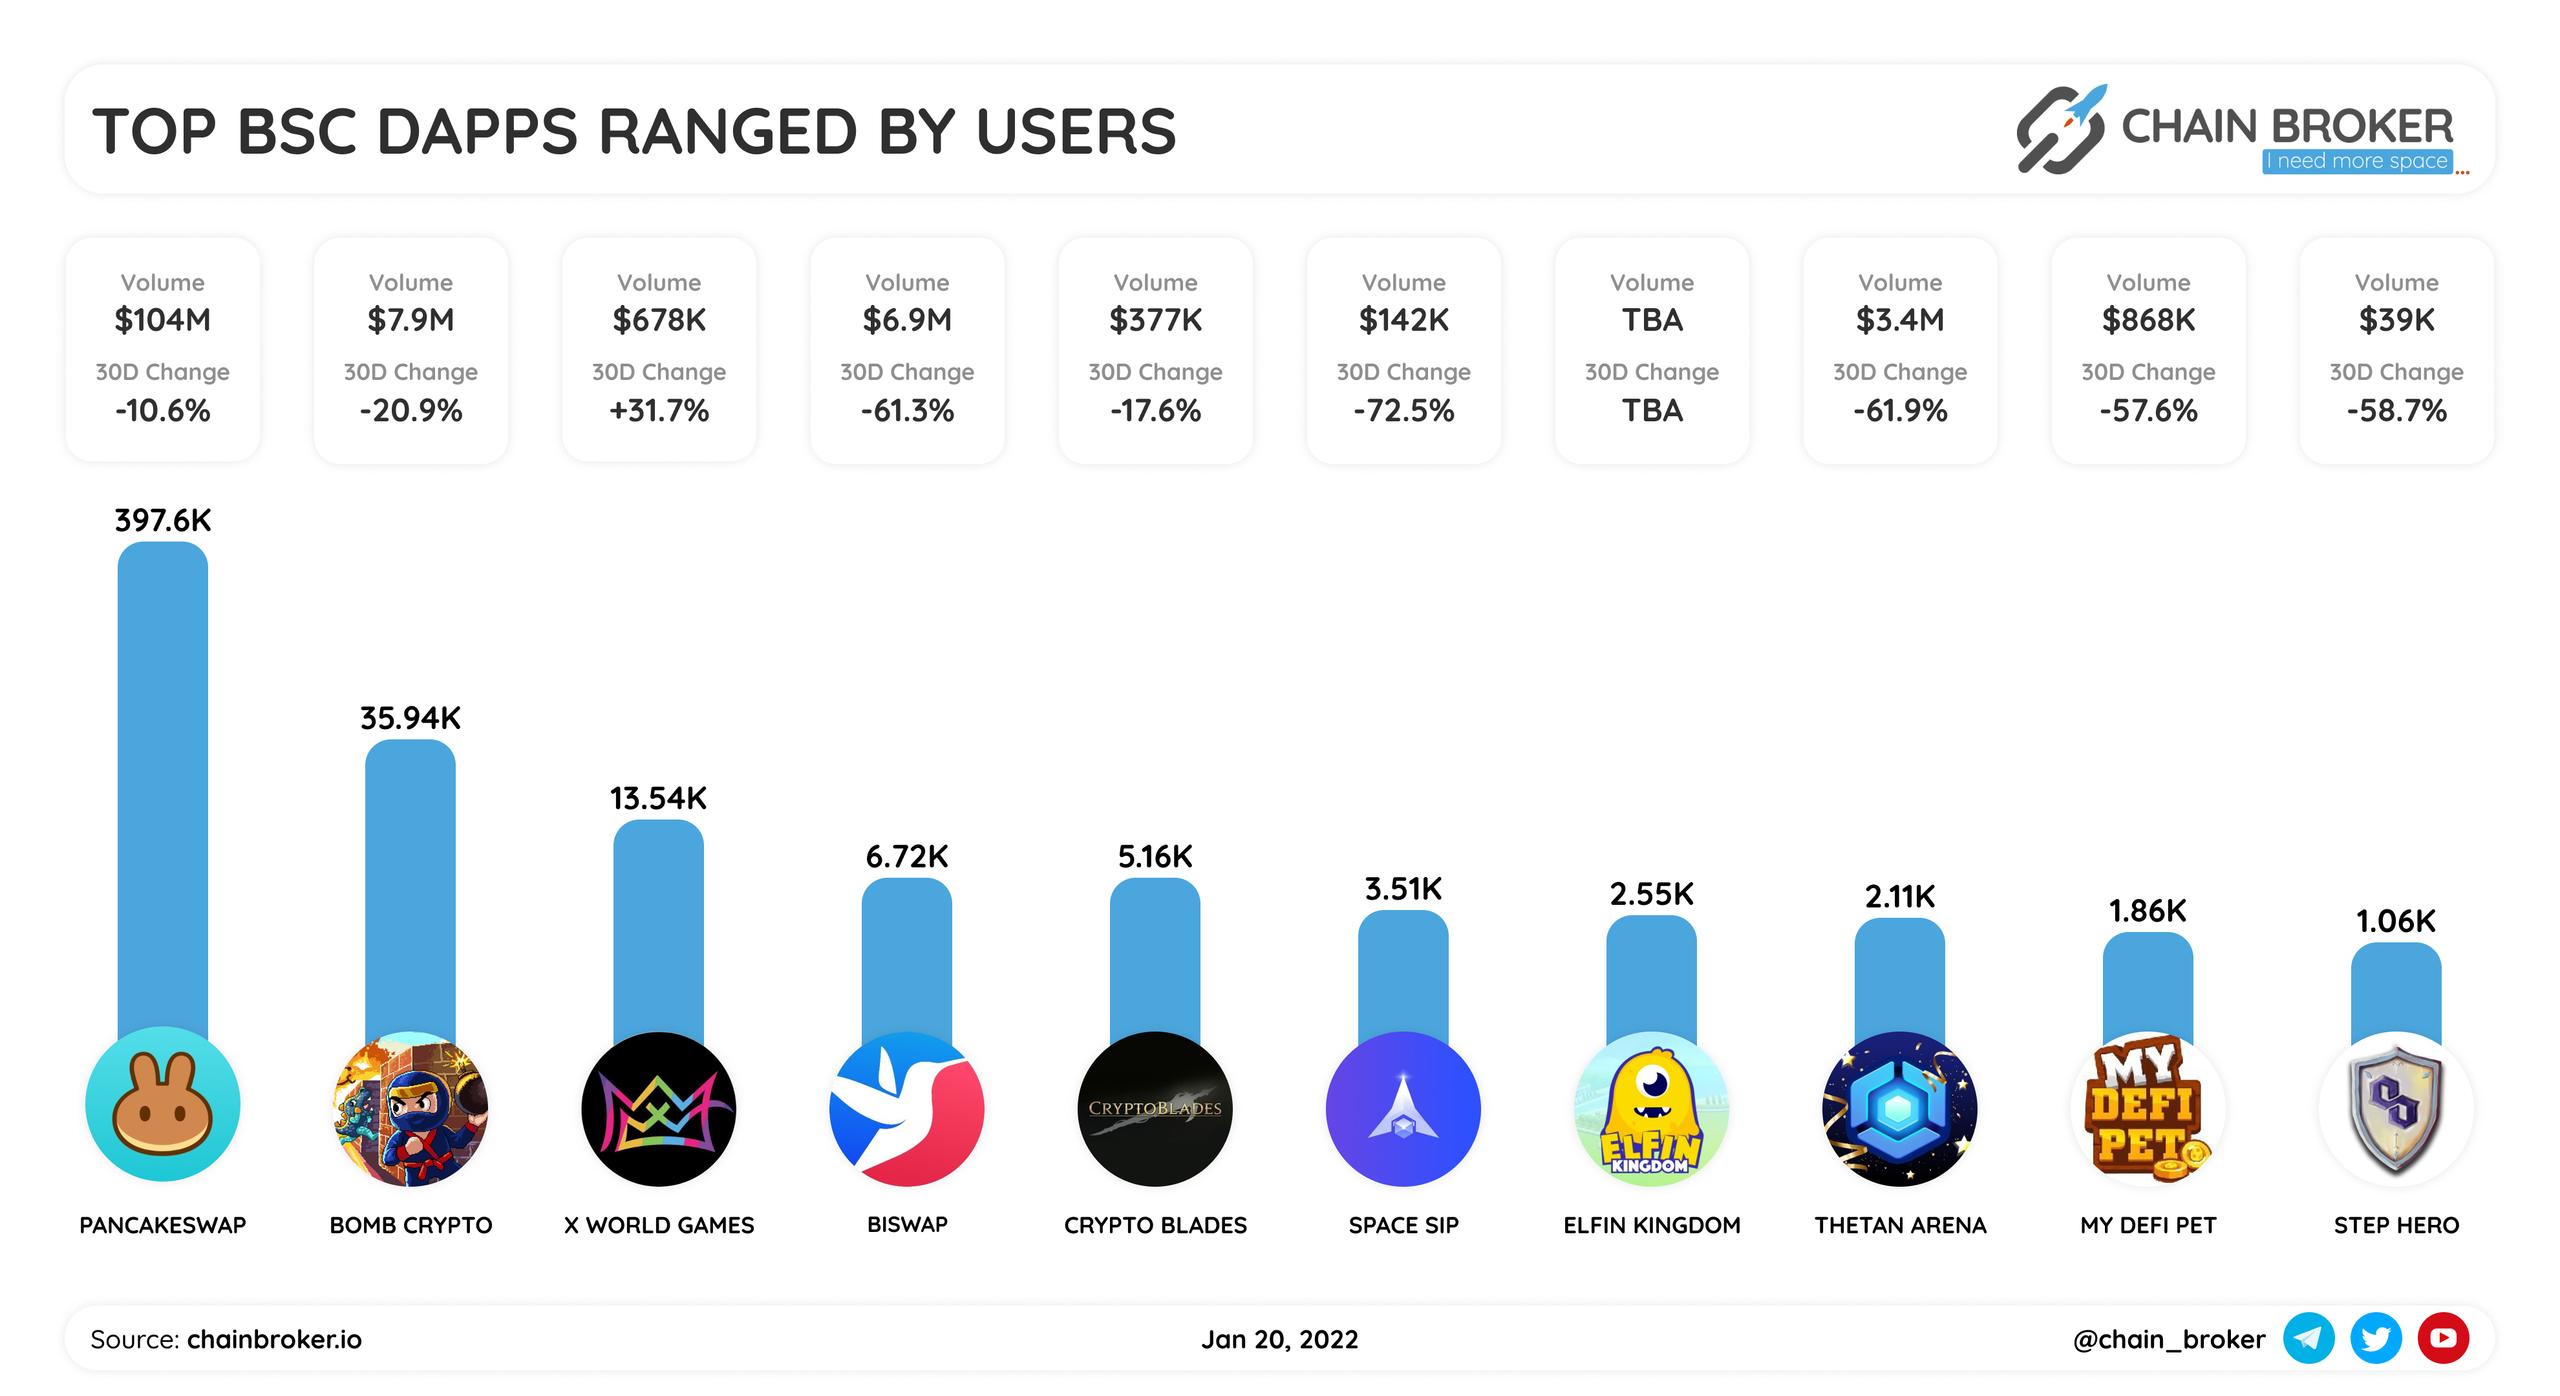 Top BSC Dapps ranged by users